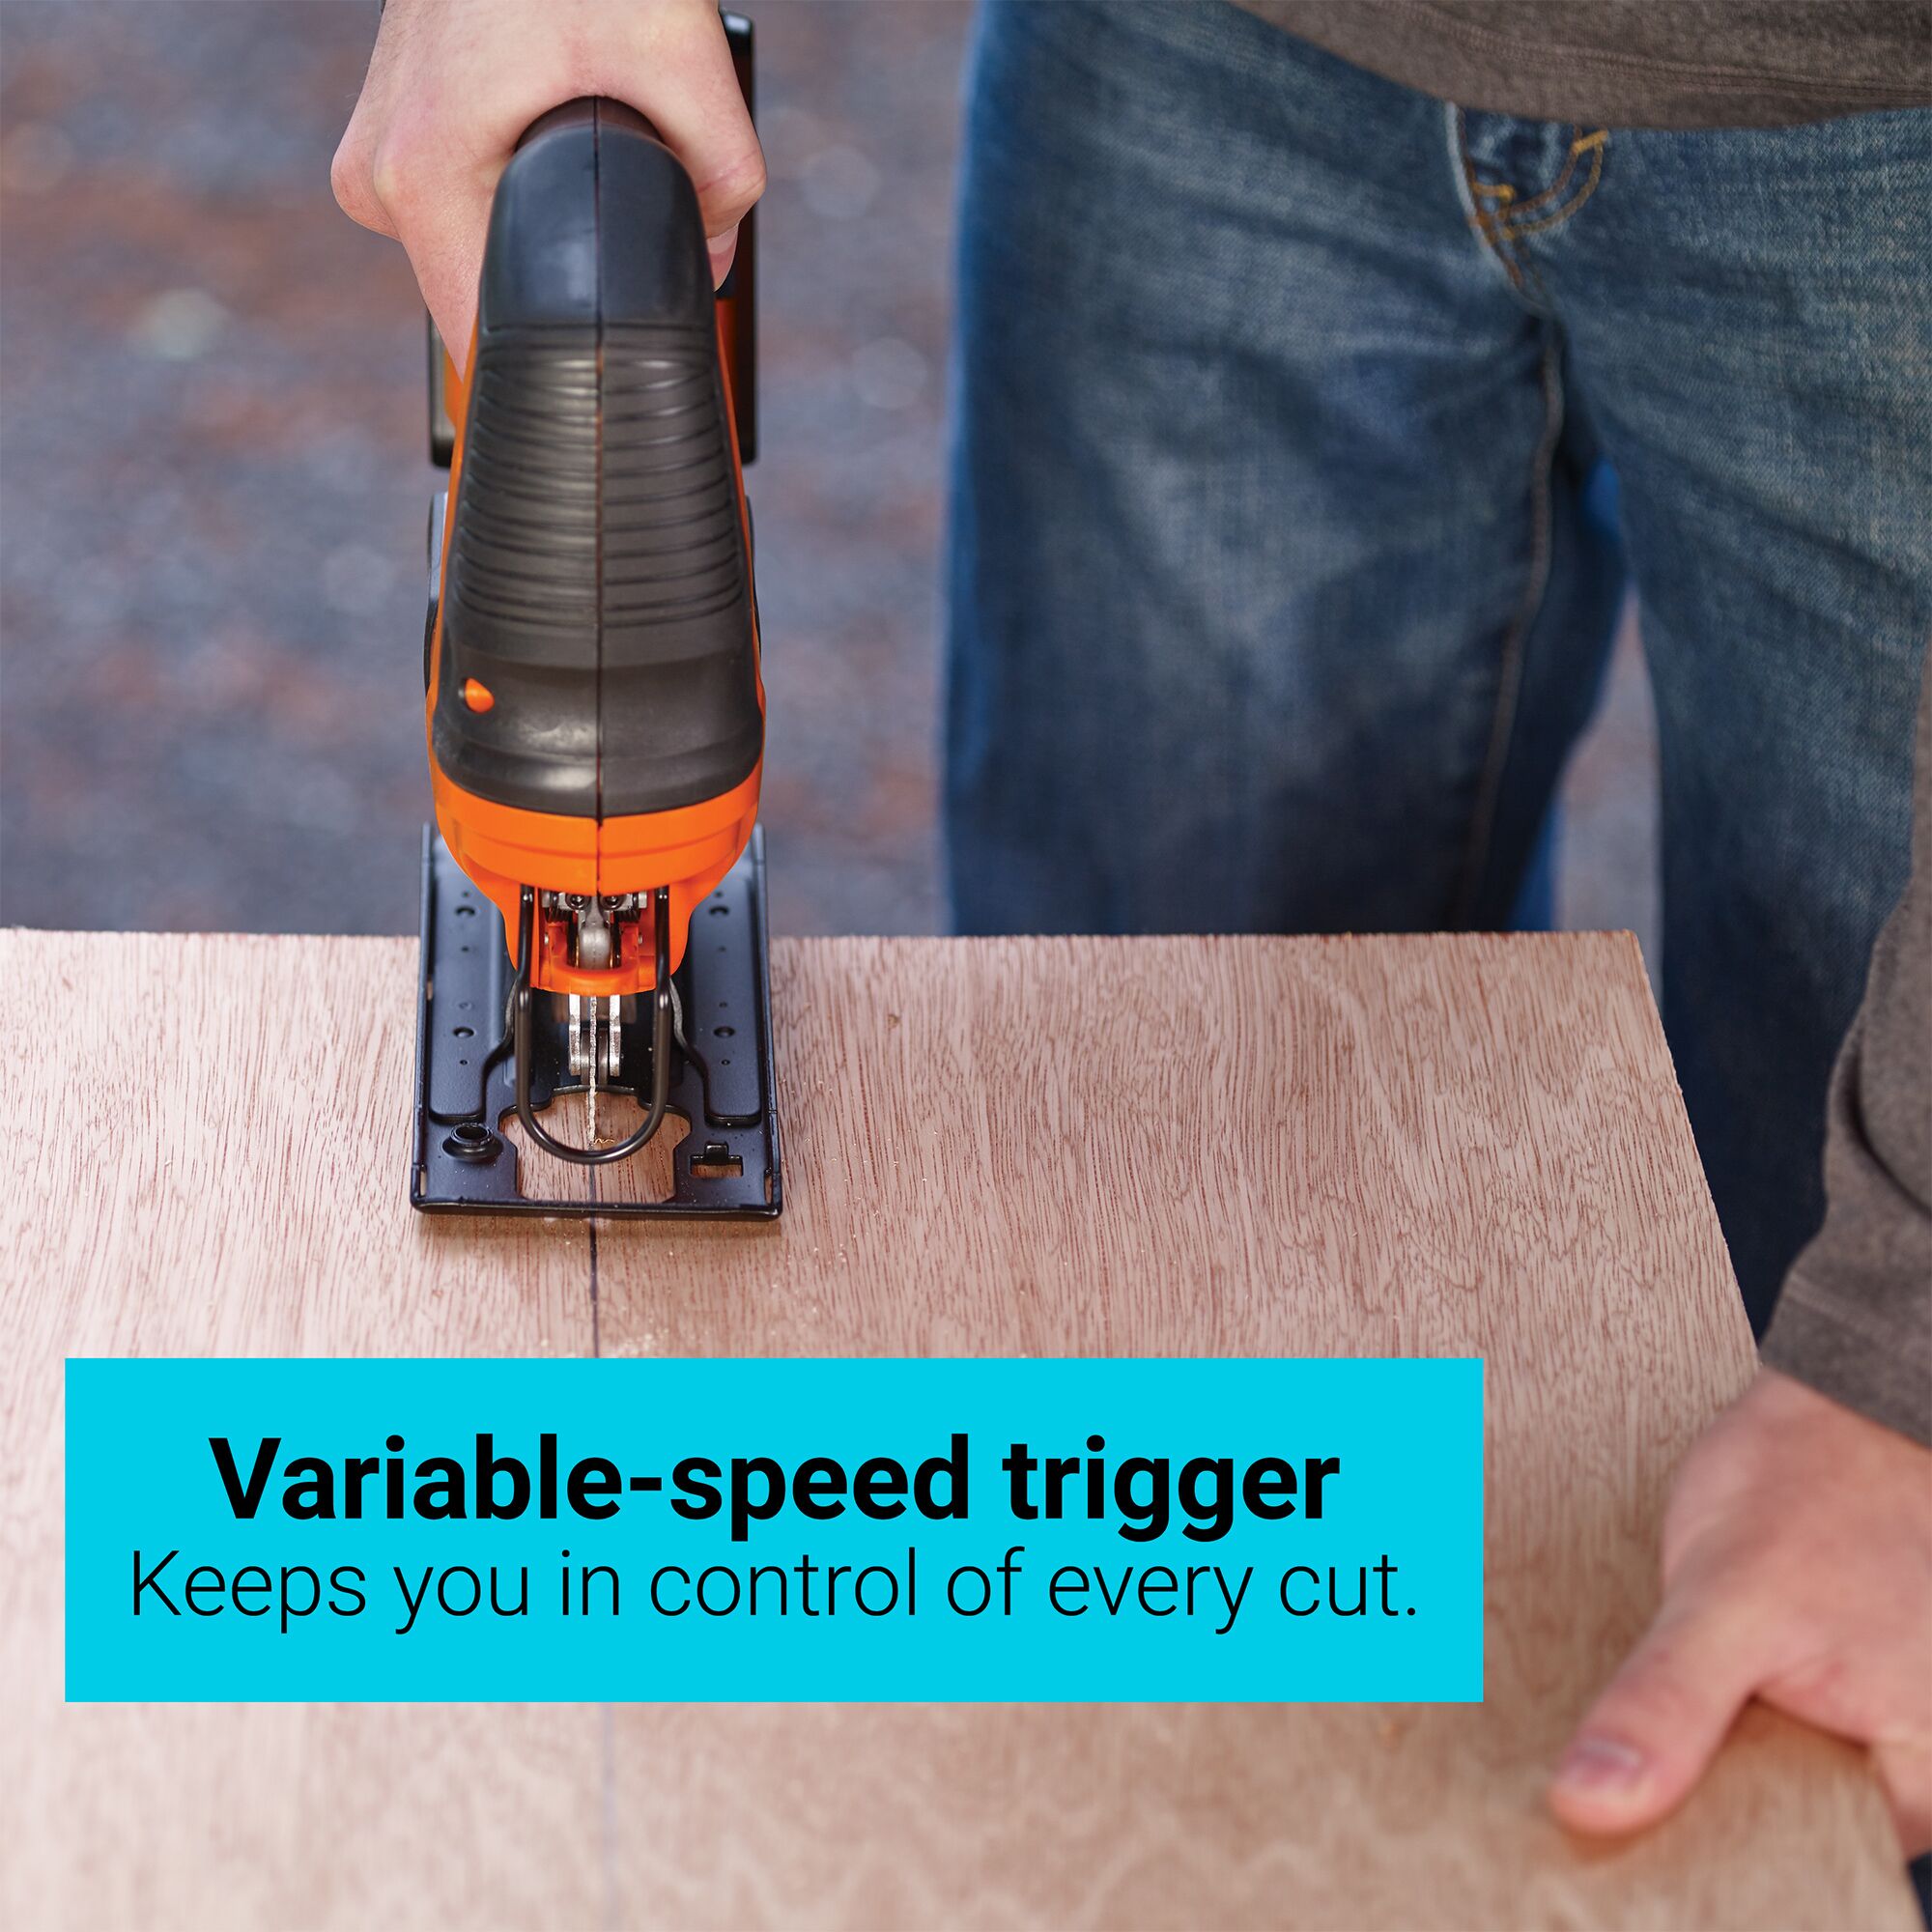 How to Choose a Cordless Jigsaw for Precise And Detailed Cuts in Thin Materials?